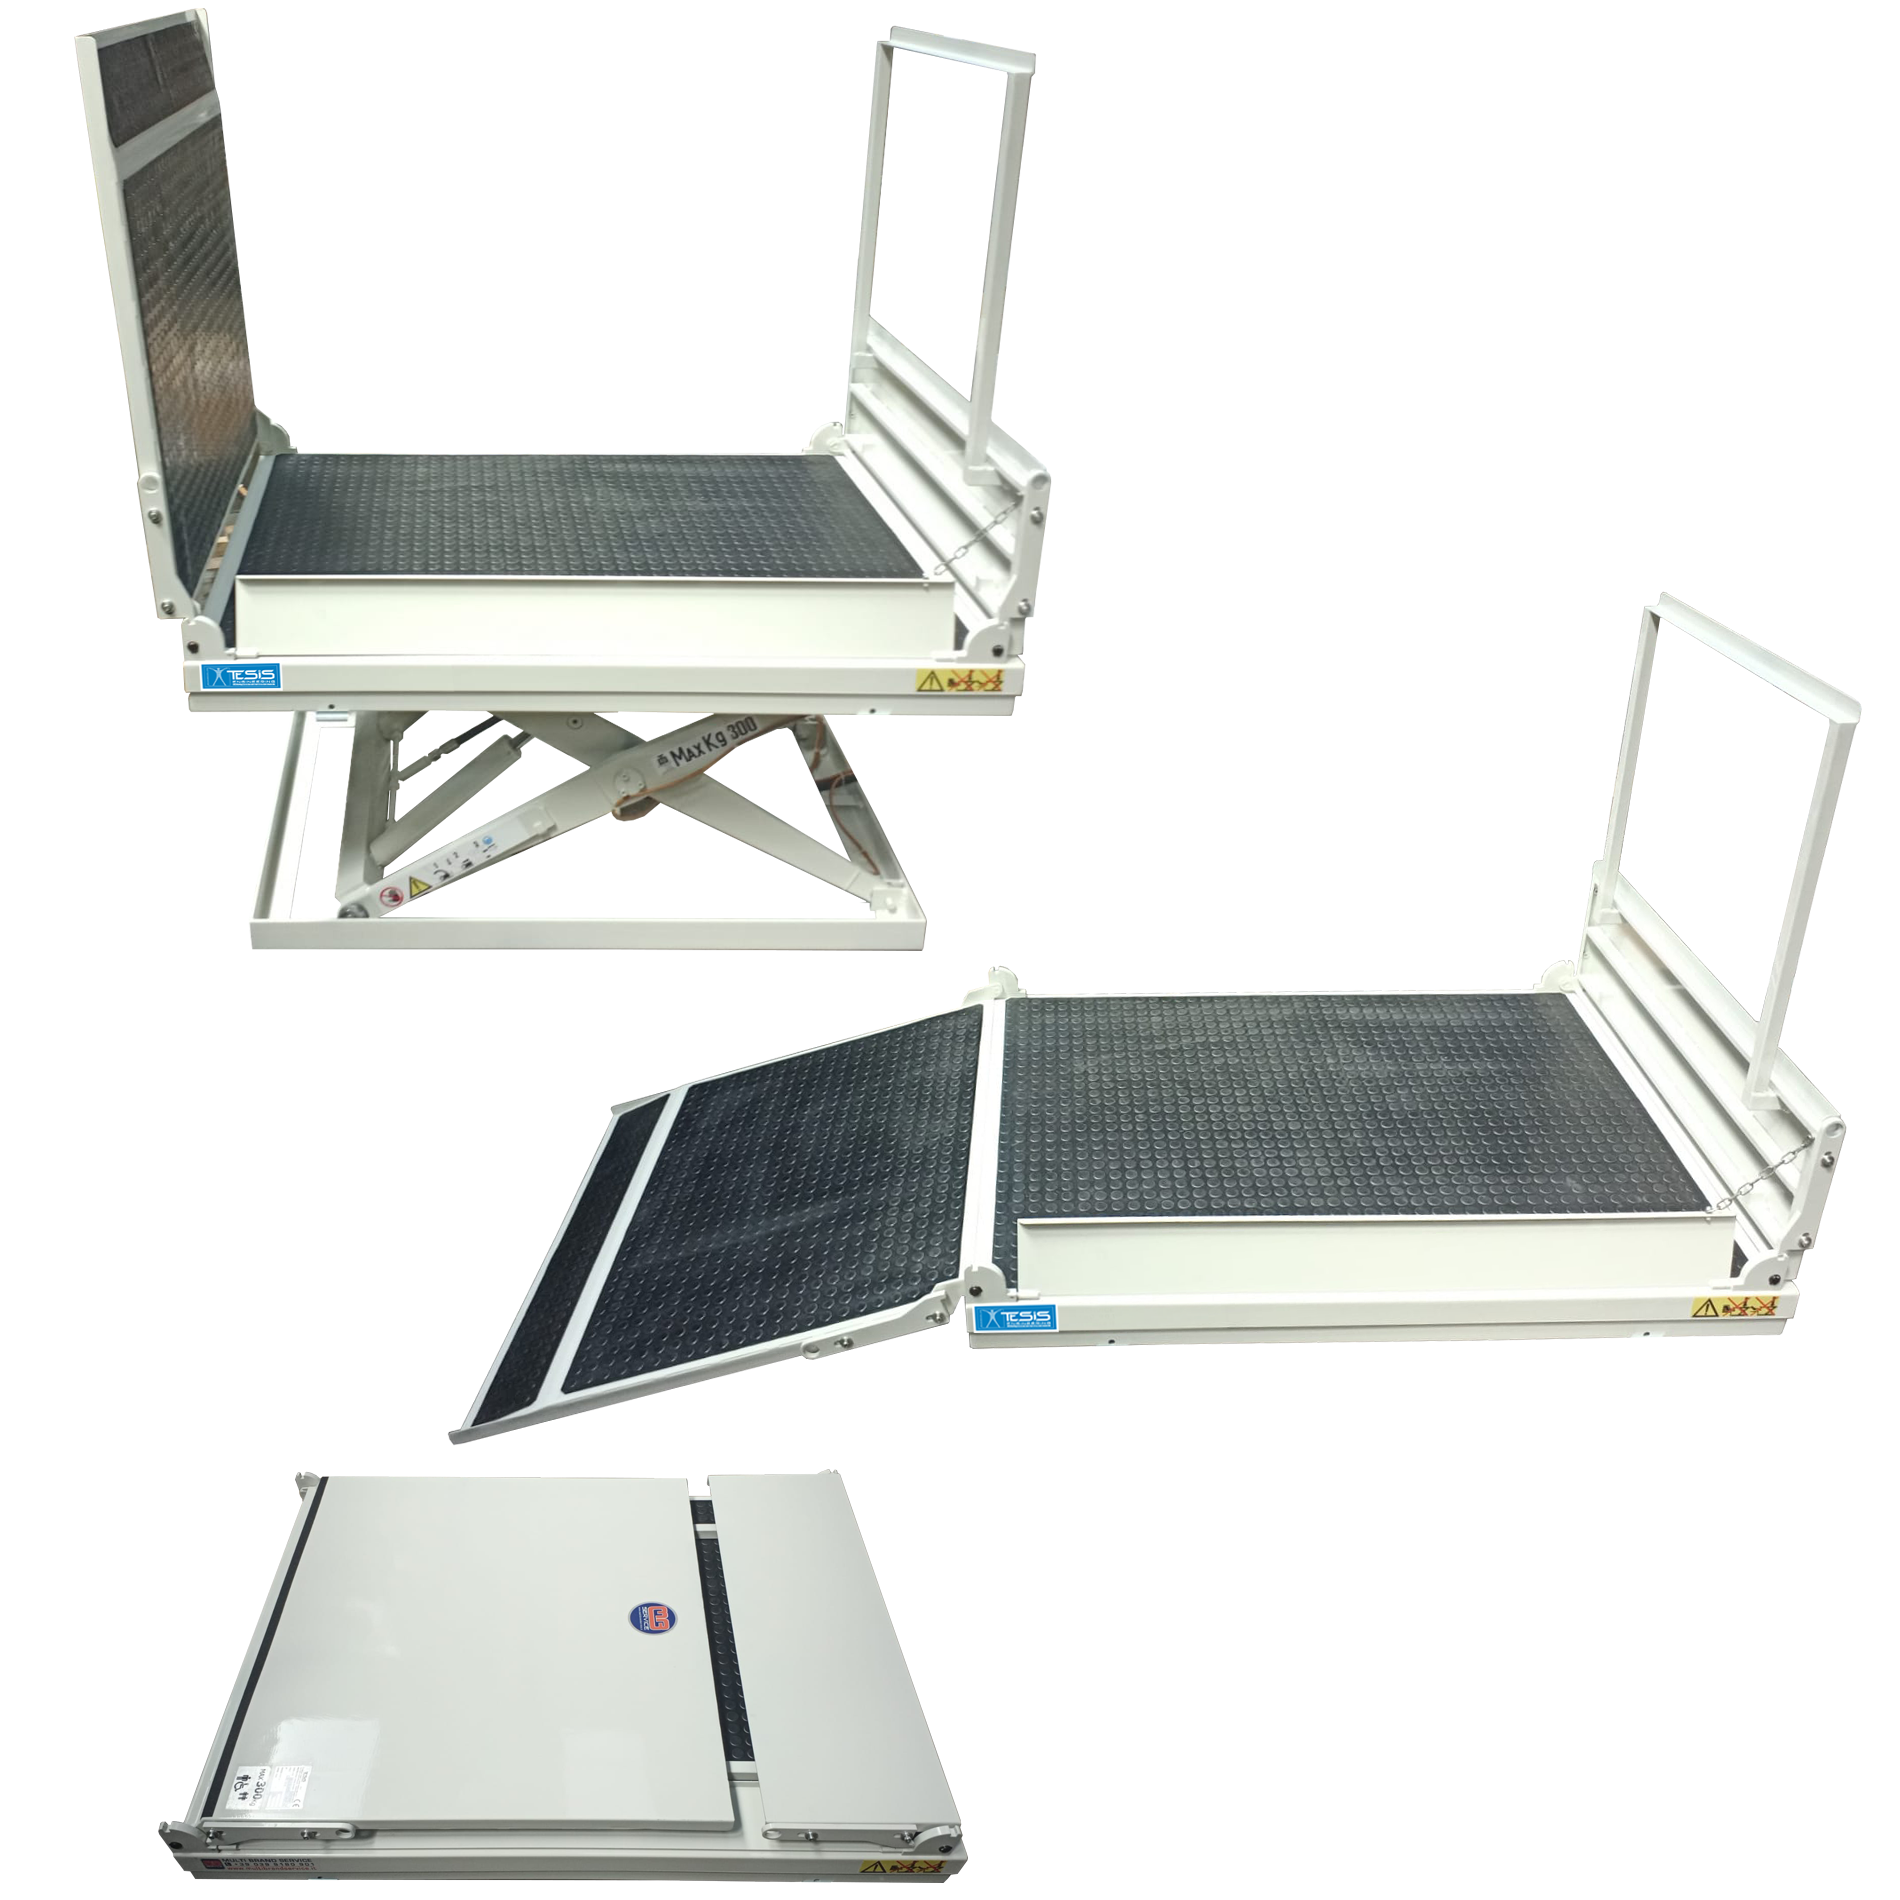 Extra-flat foldable platform lift with integrated ramp and handle for disabled access, access platform lifts, wheel-chair lift tables, access lifts